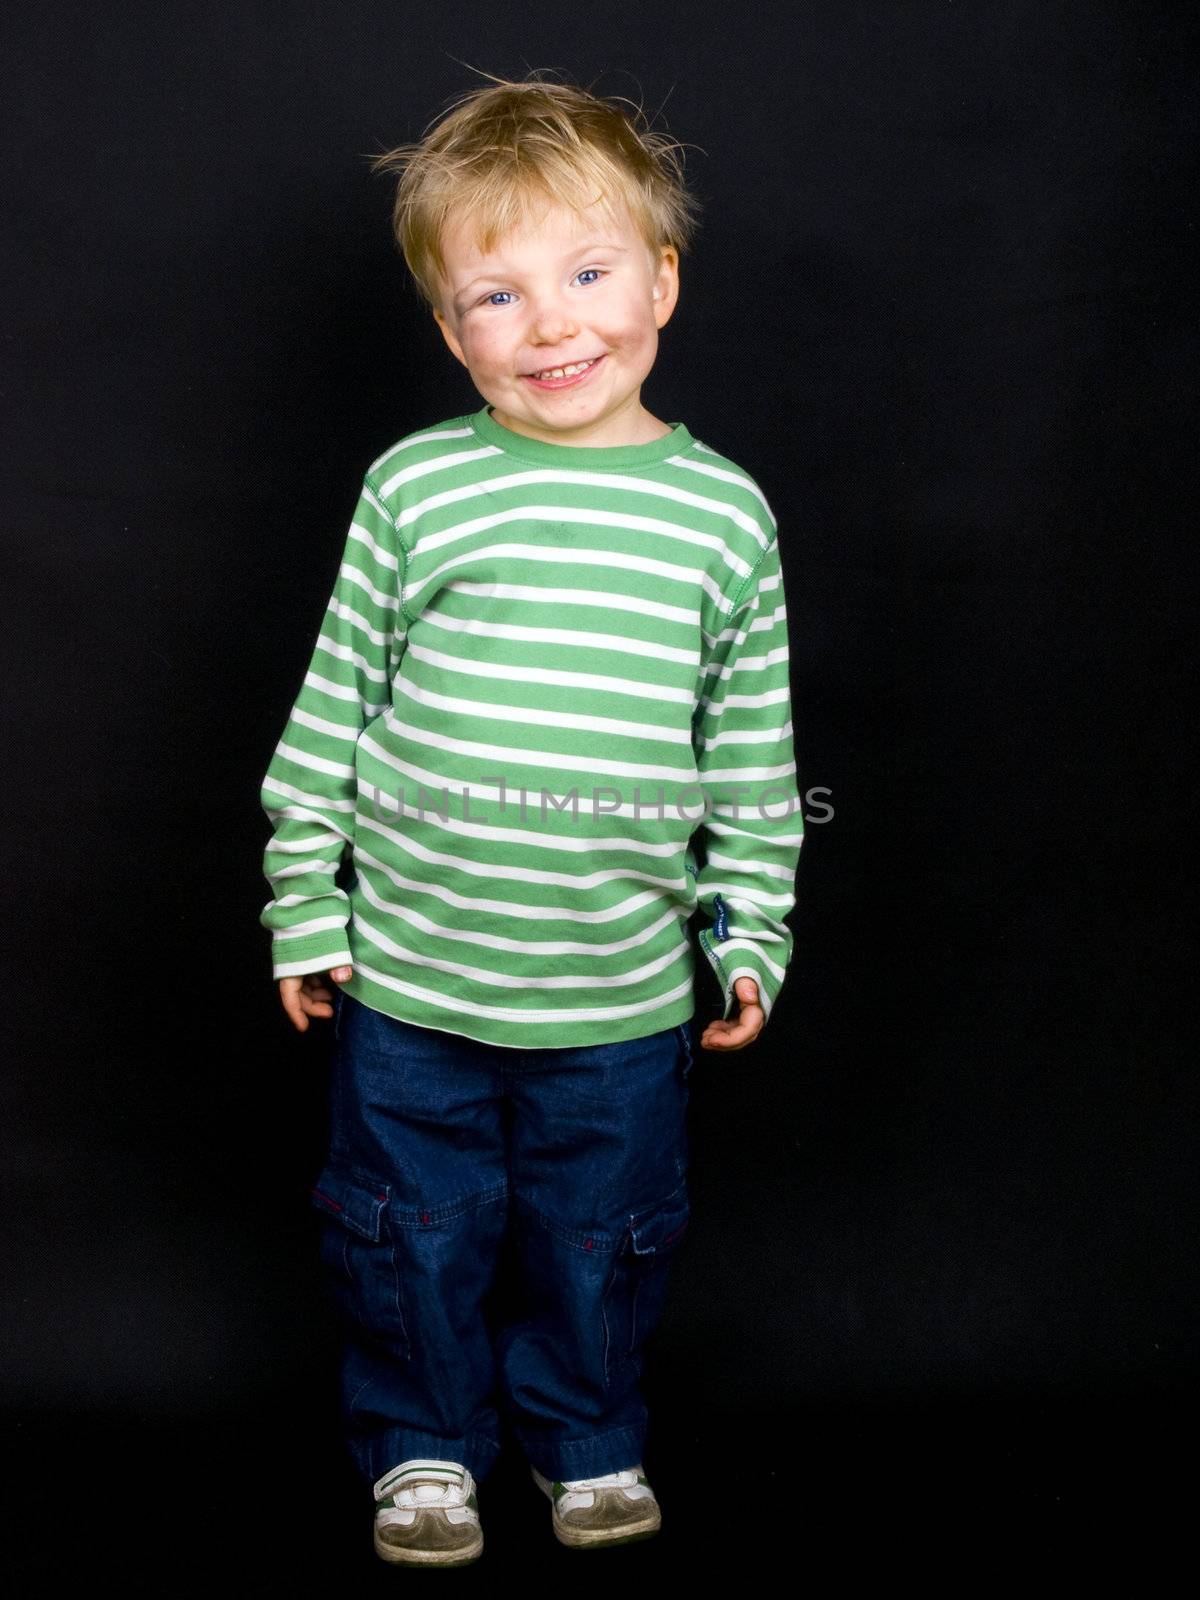 Smiling little boy on black background. Boy have blue eyes, blond hair and a bit of dirt on his face